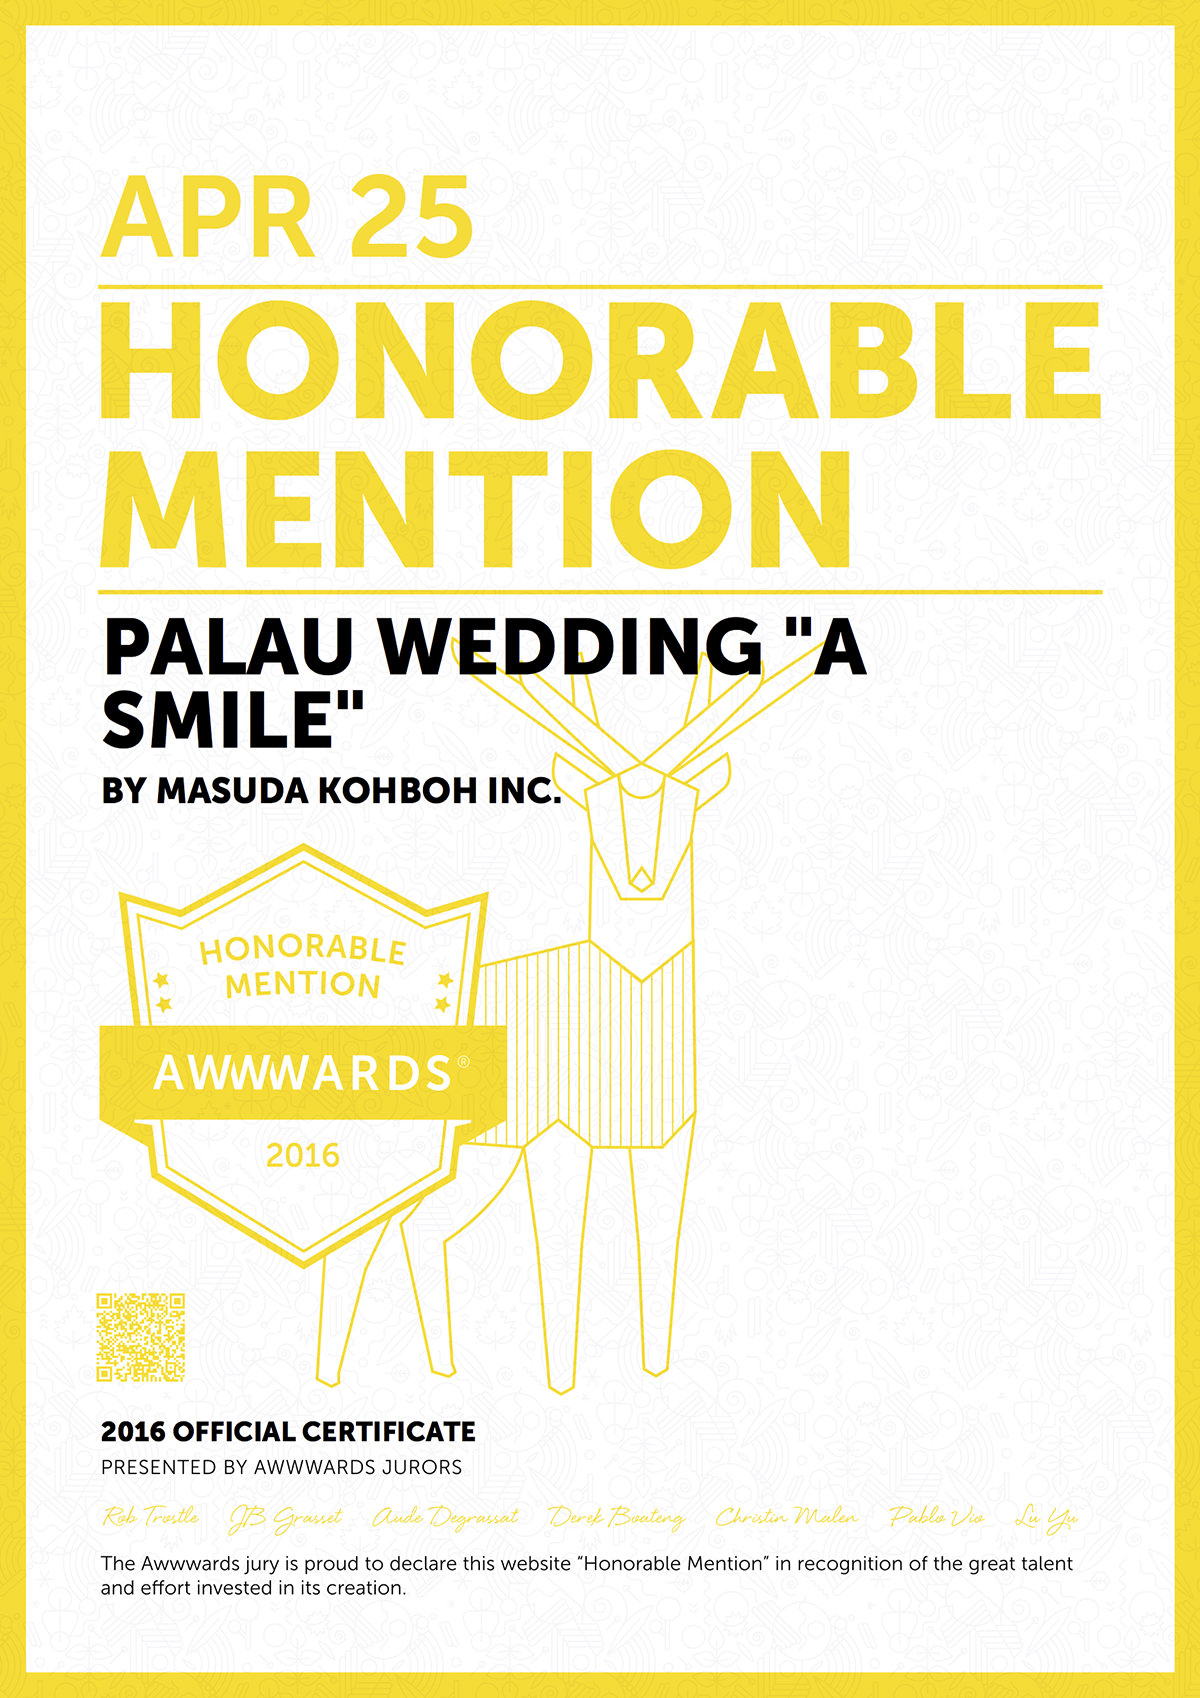 awwwards honorable mention受賞